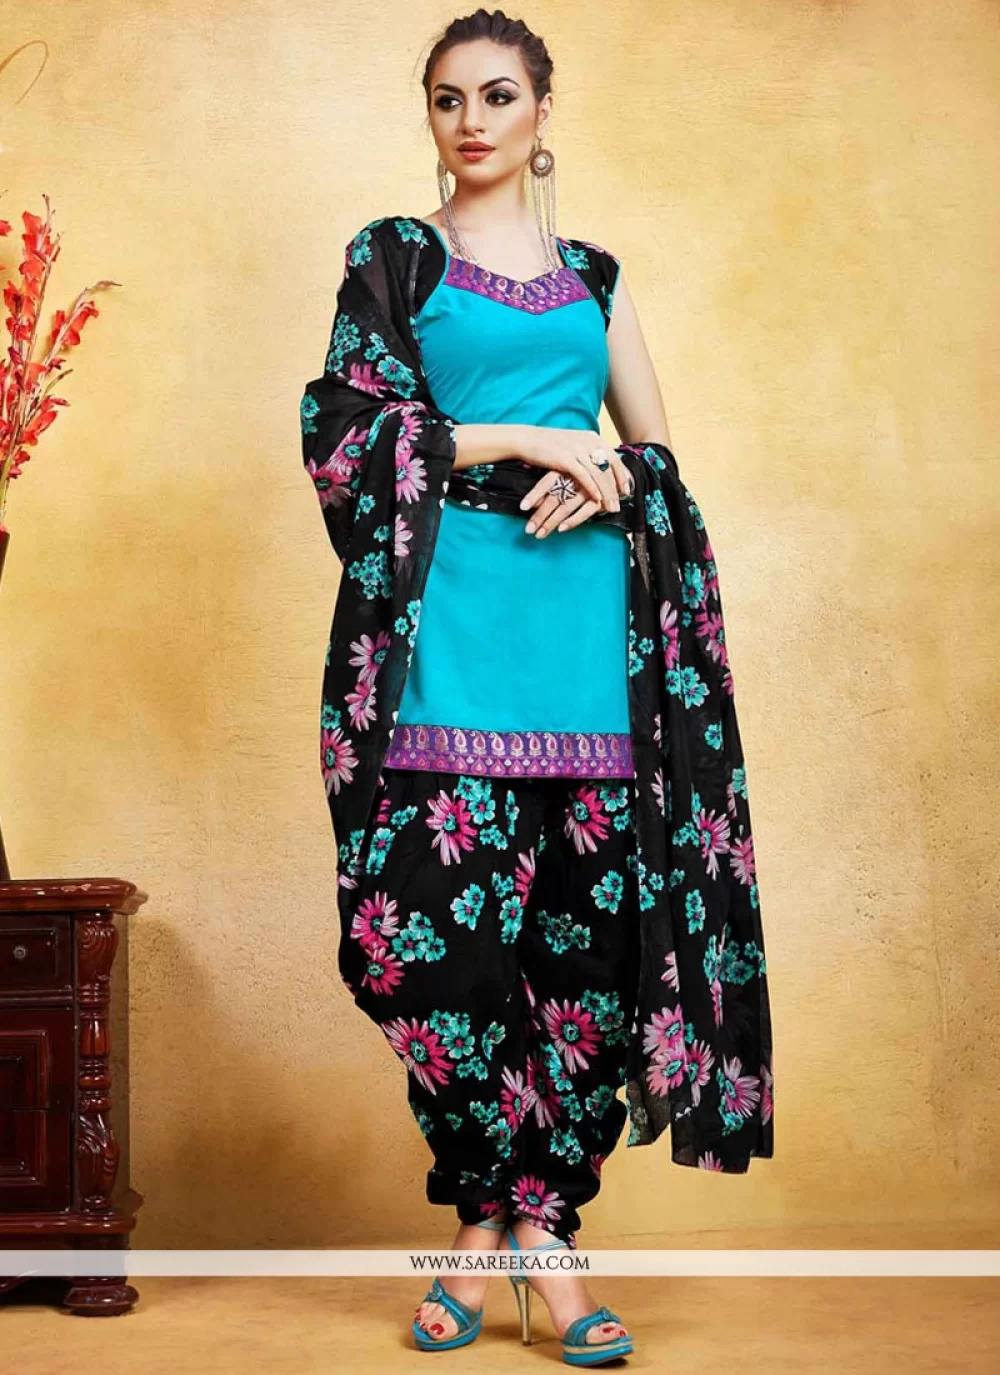 Punjabi Fashion Online - ❣Ladies One Stop Online Shop❣ Punjabi Suit@ KH  READY TO SHIP 💯% BEST QUALITY Price : RM100 @ Unstitched Price : RM200 @  Ready Made Shipping : Poslaju